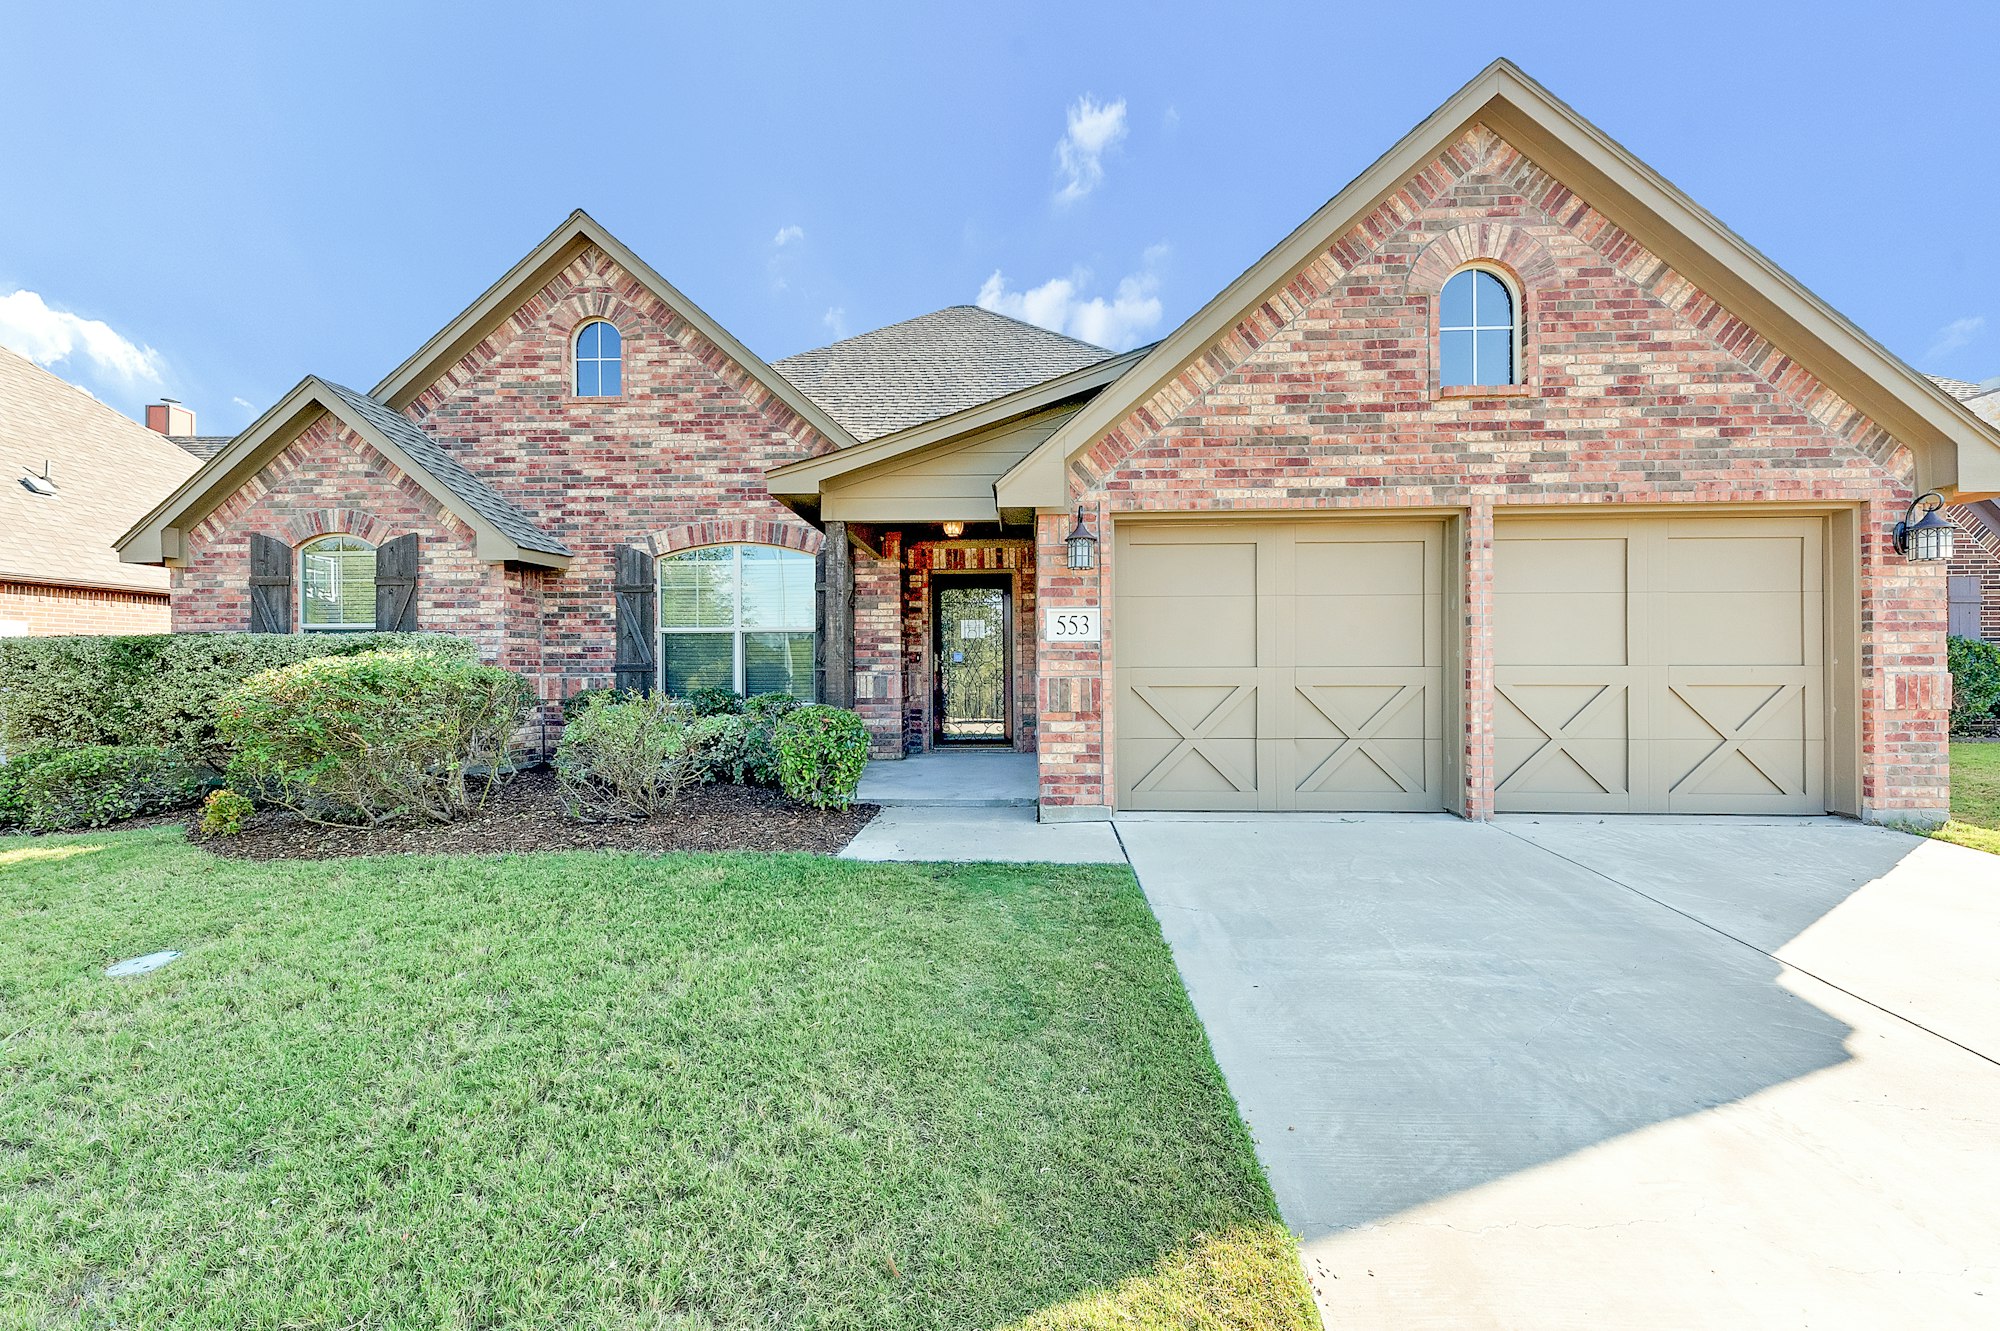 Photo 1 of 27 - 553 Sterling Dr, Fort Worth, TX 76126